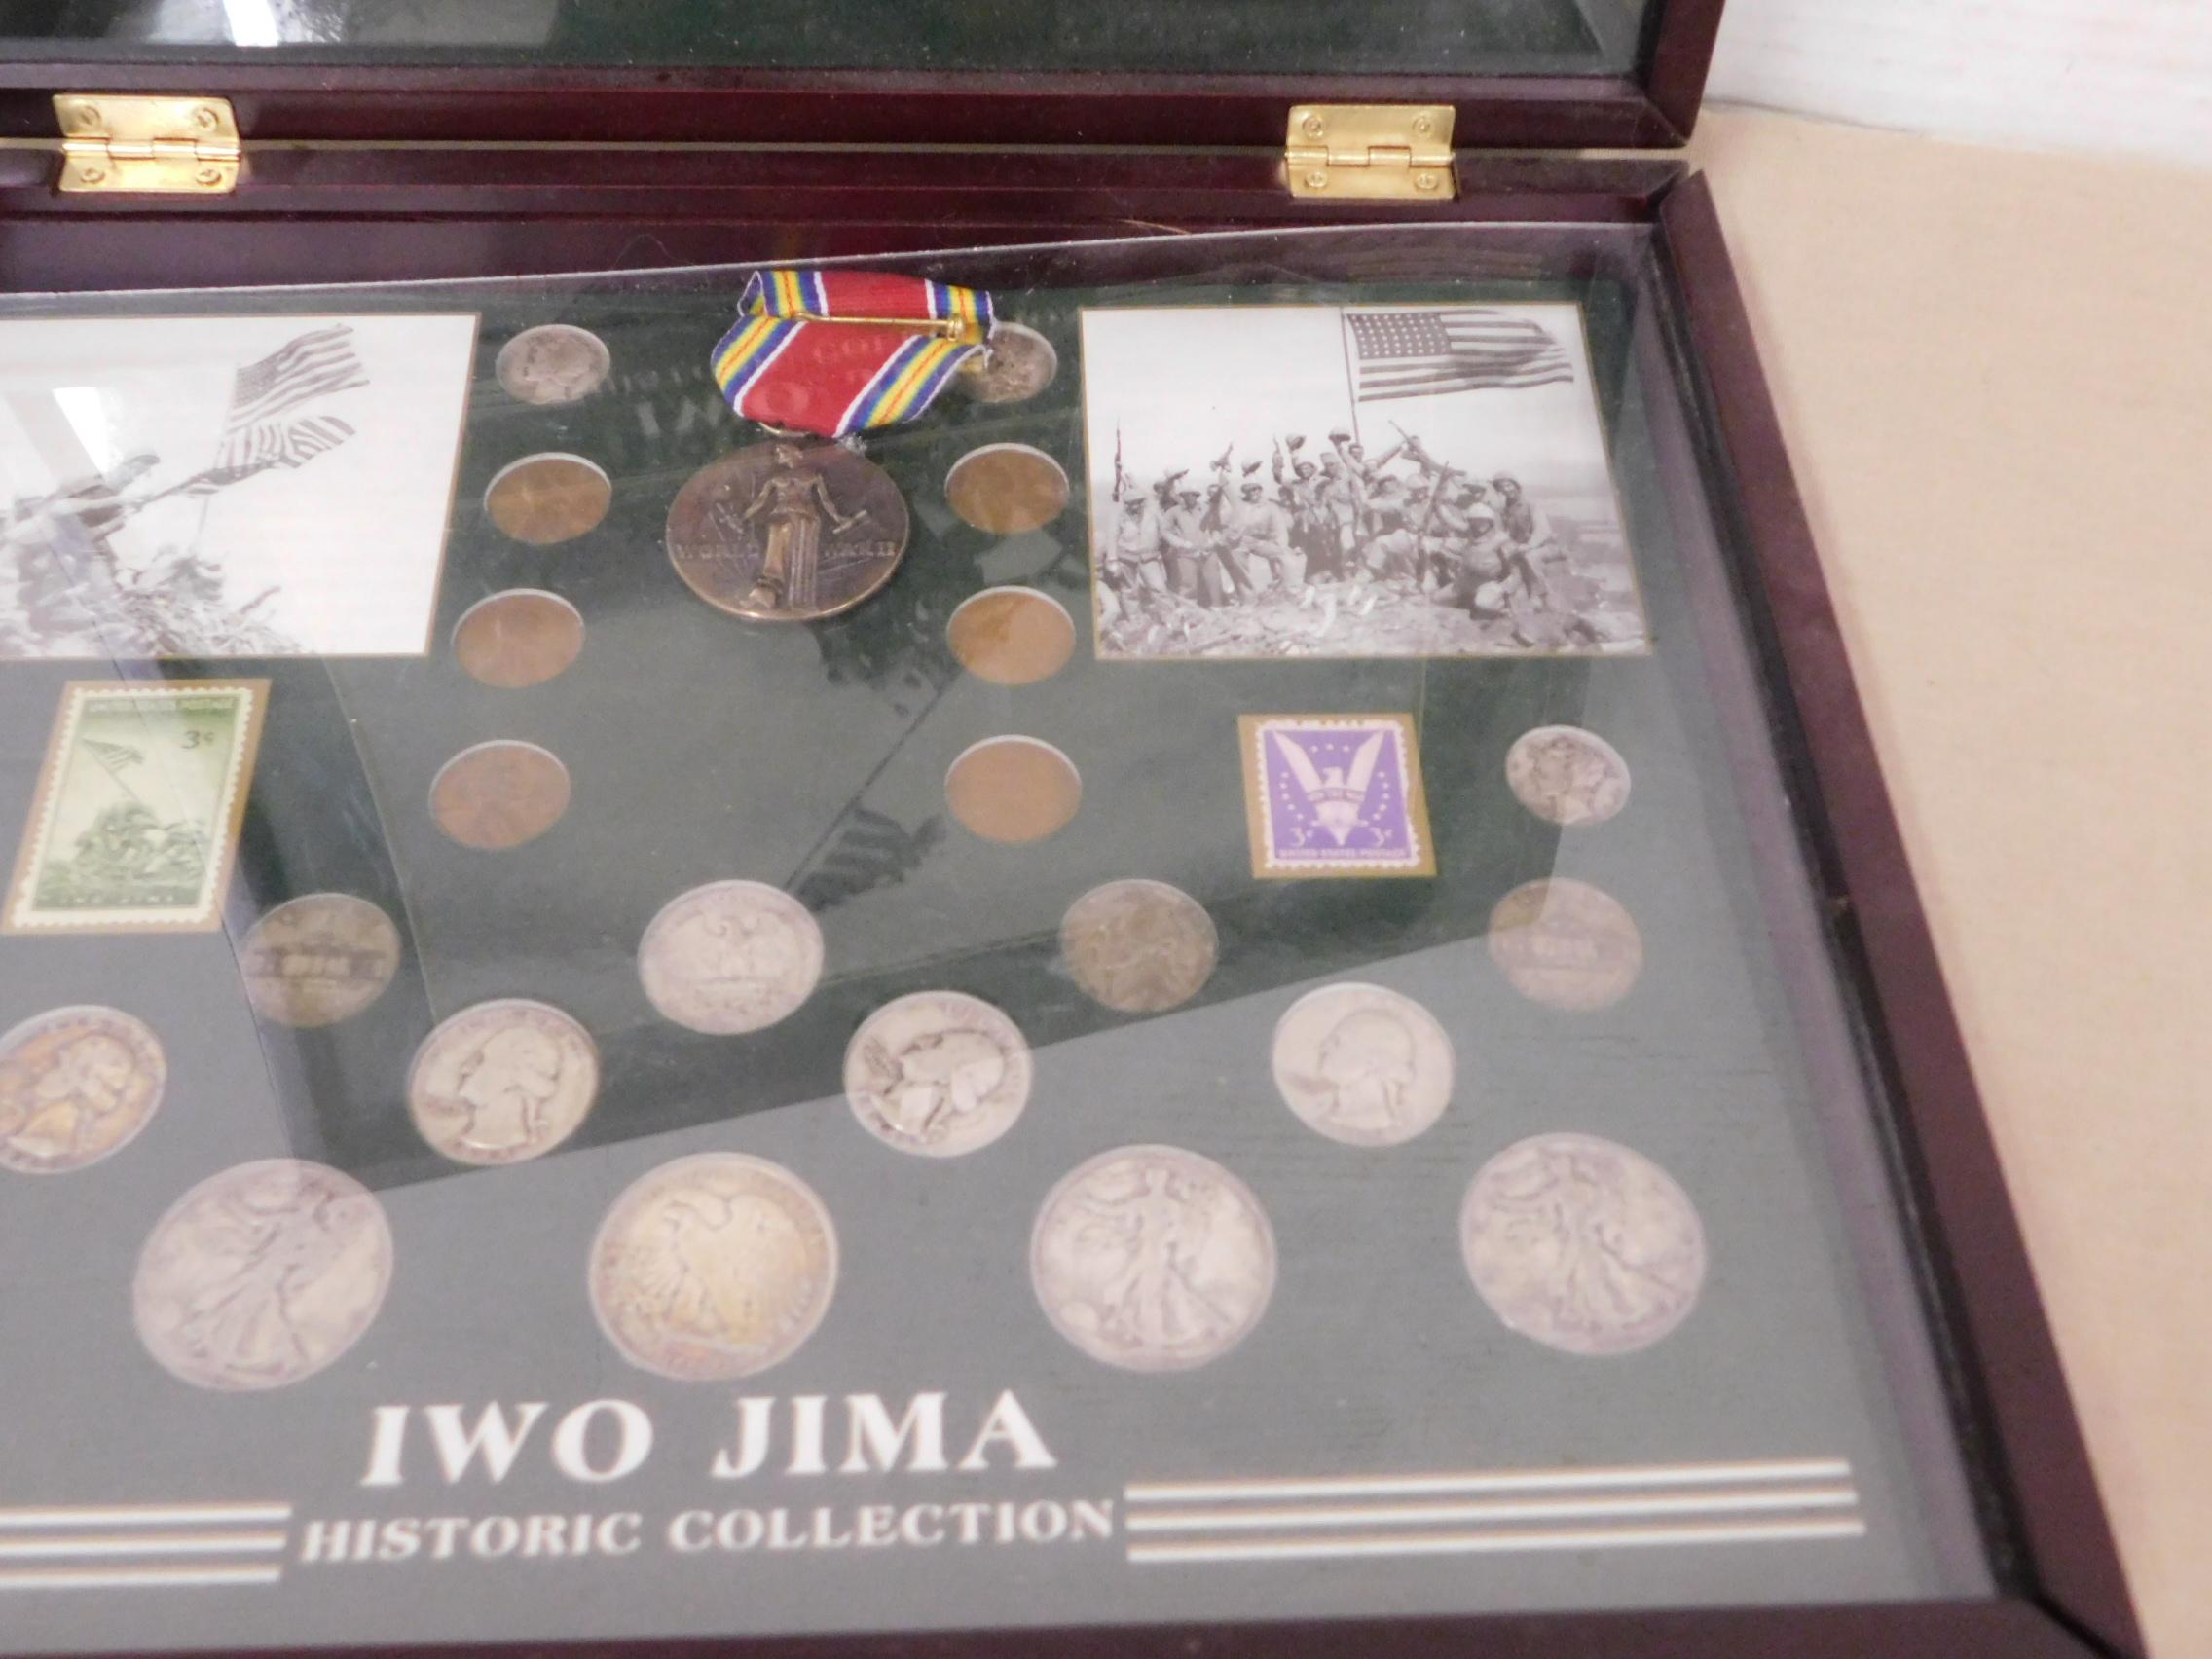 IWO JIMA HISTORIC COIN & STAMP COLLECTION